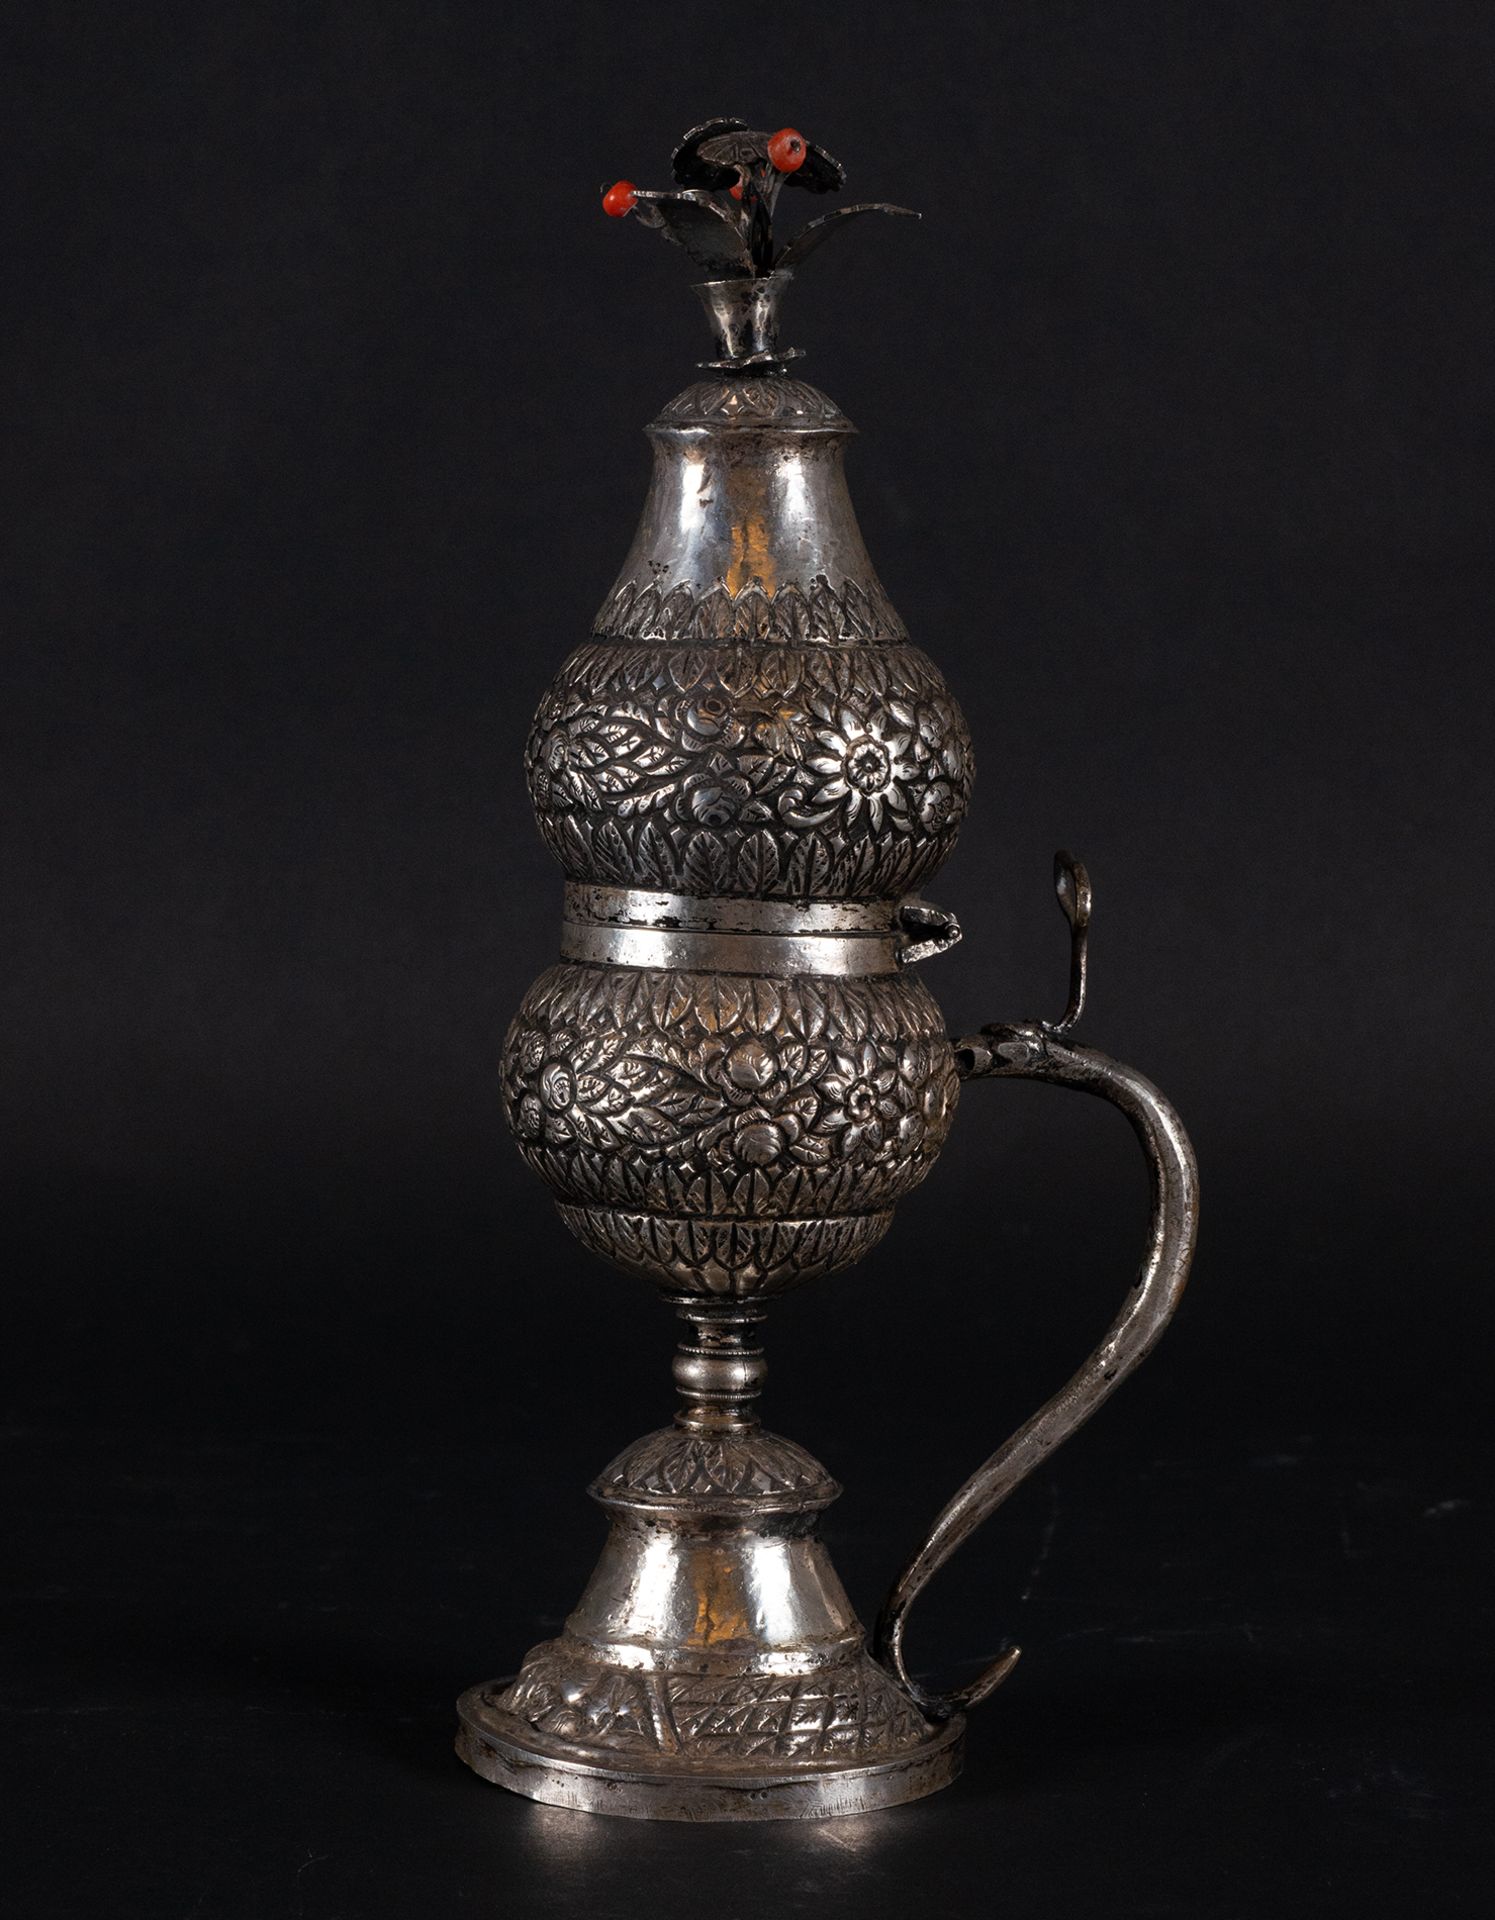 Chocolate cup in solid silver, Trapani, Sicily, Italian work of the 18th century
